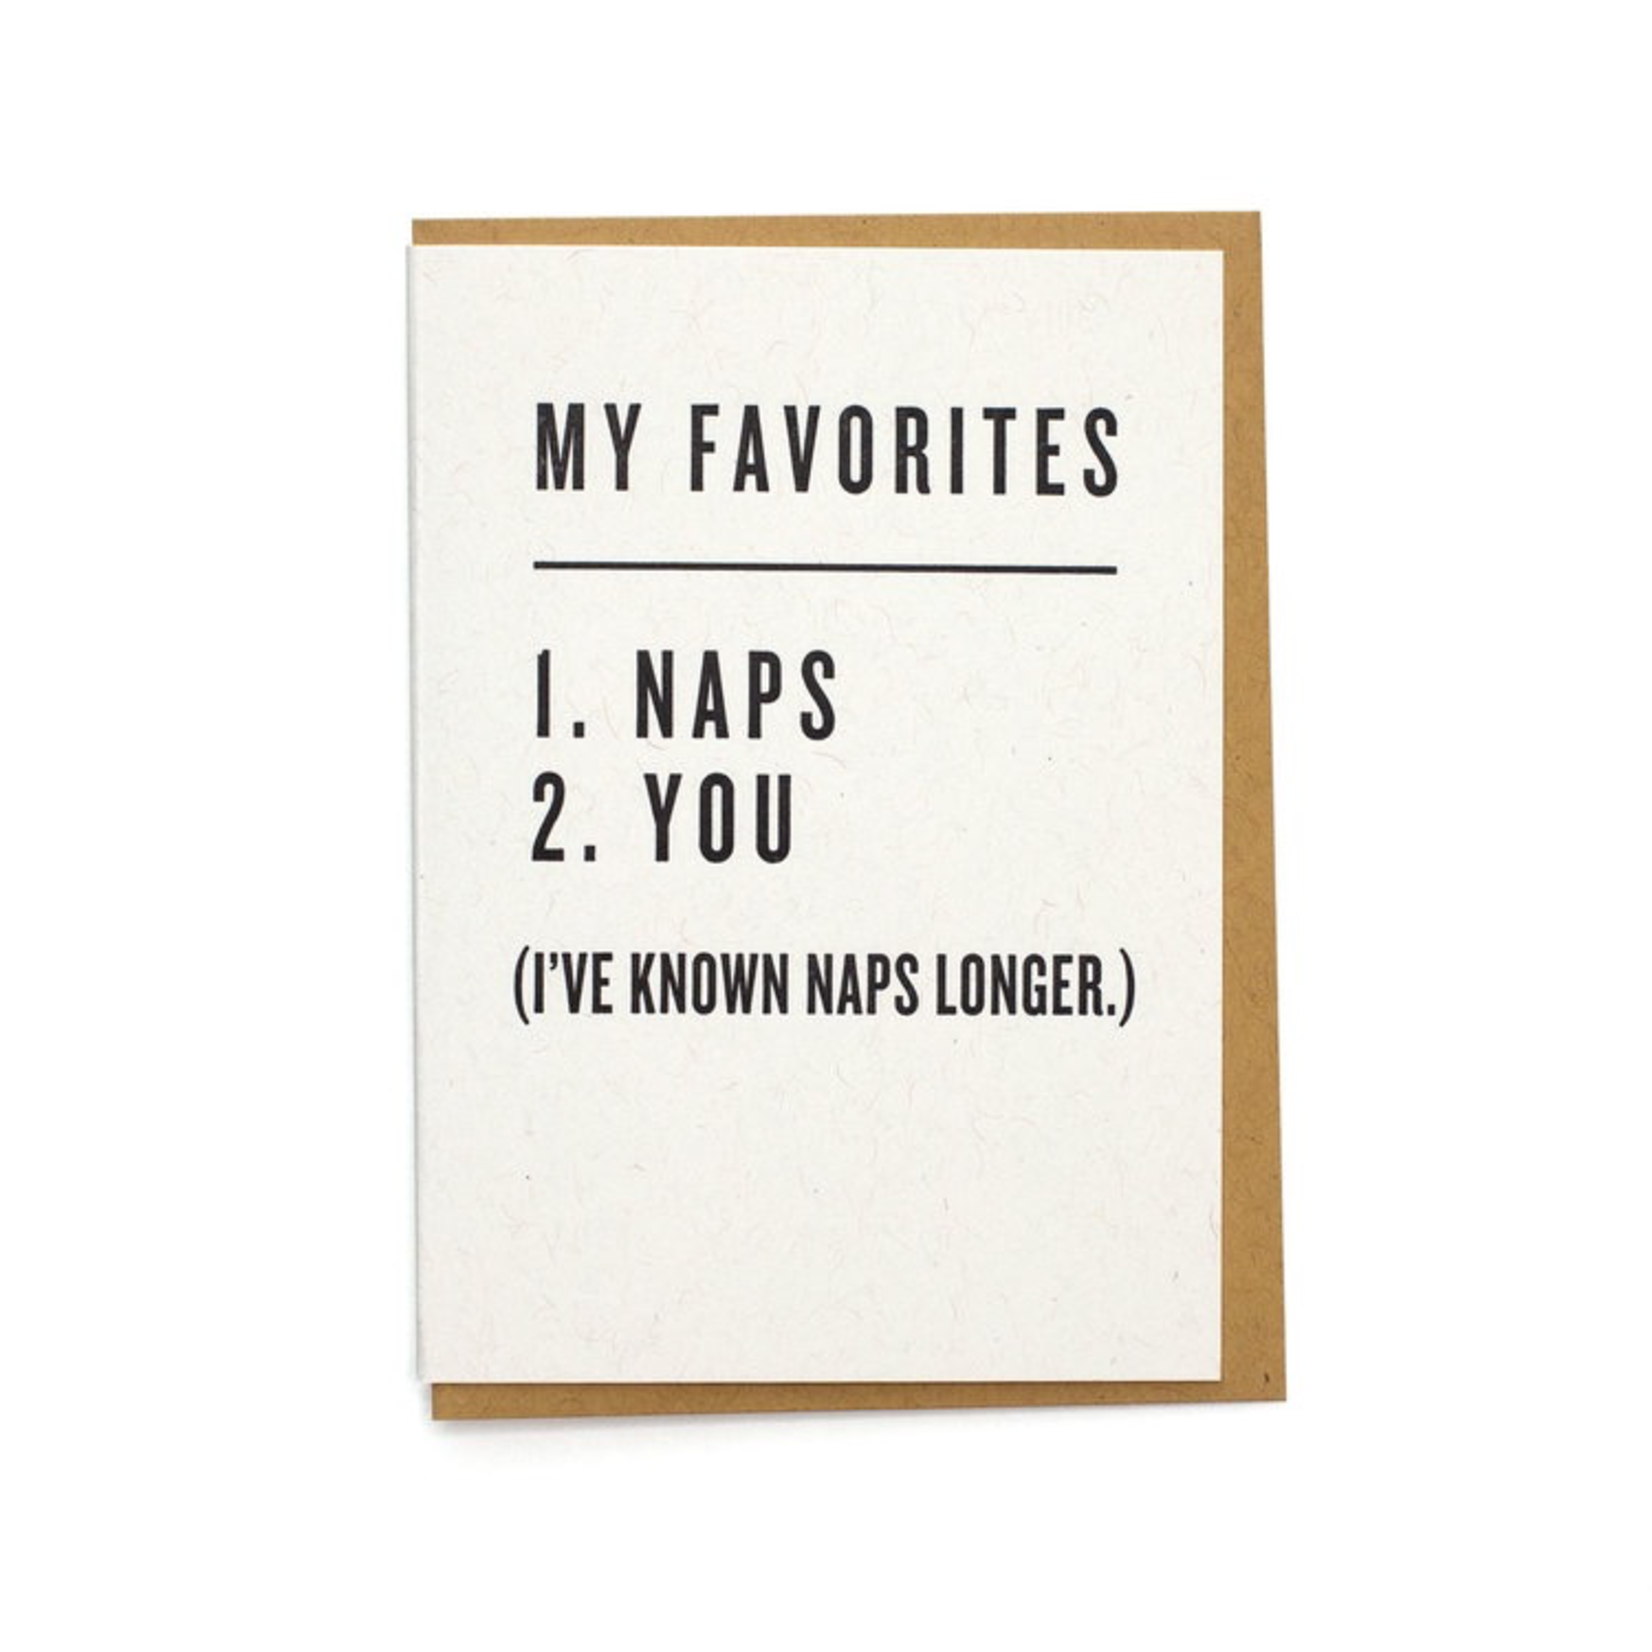 Greeting Cards - Love Favorites: Naps & You